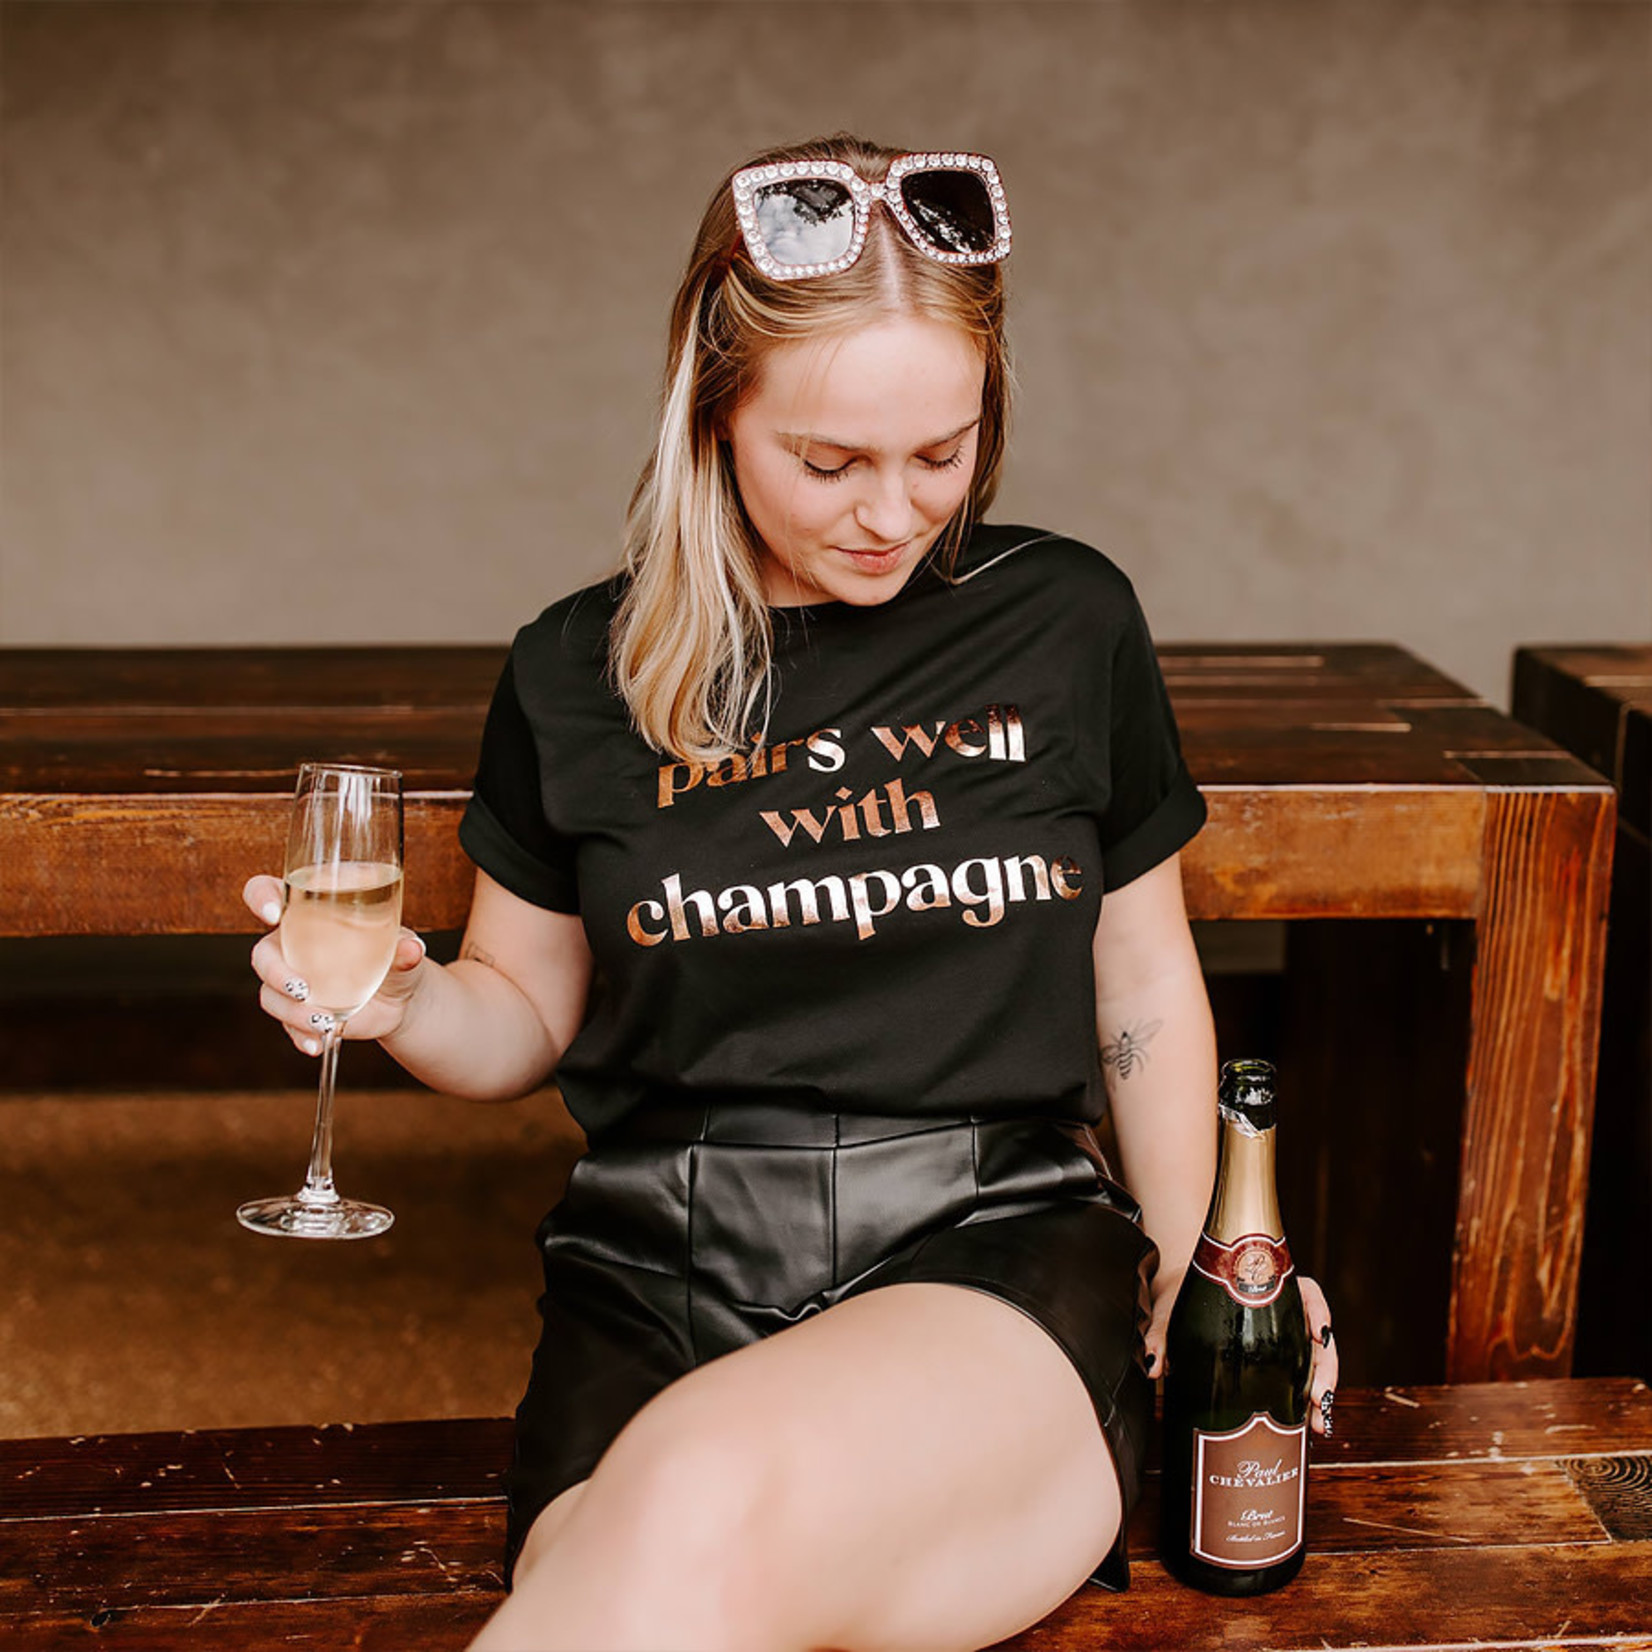 Mugsby Pairs Well with Champagne Tee